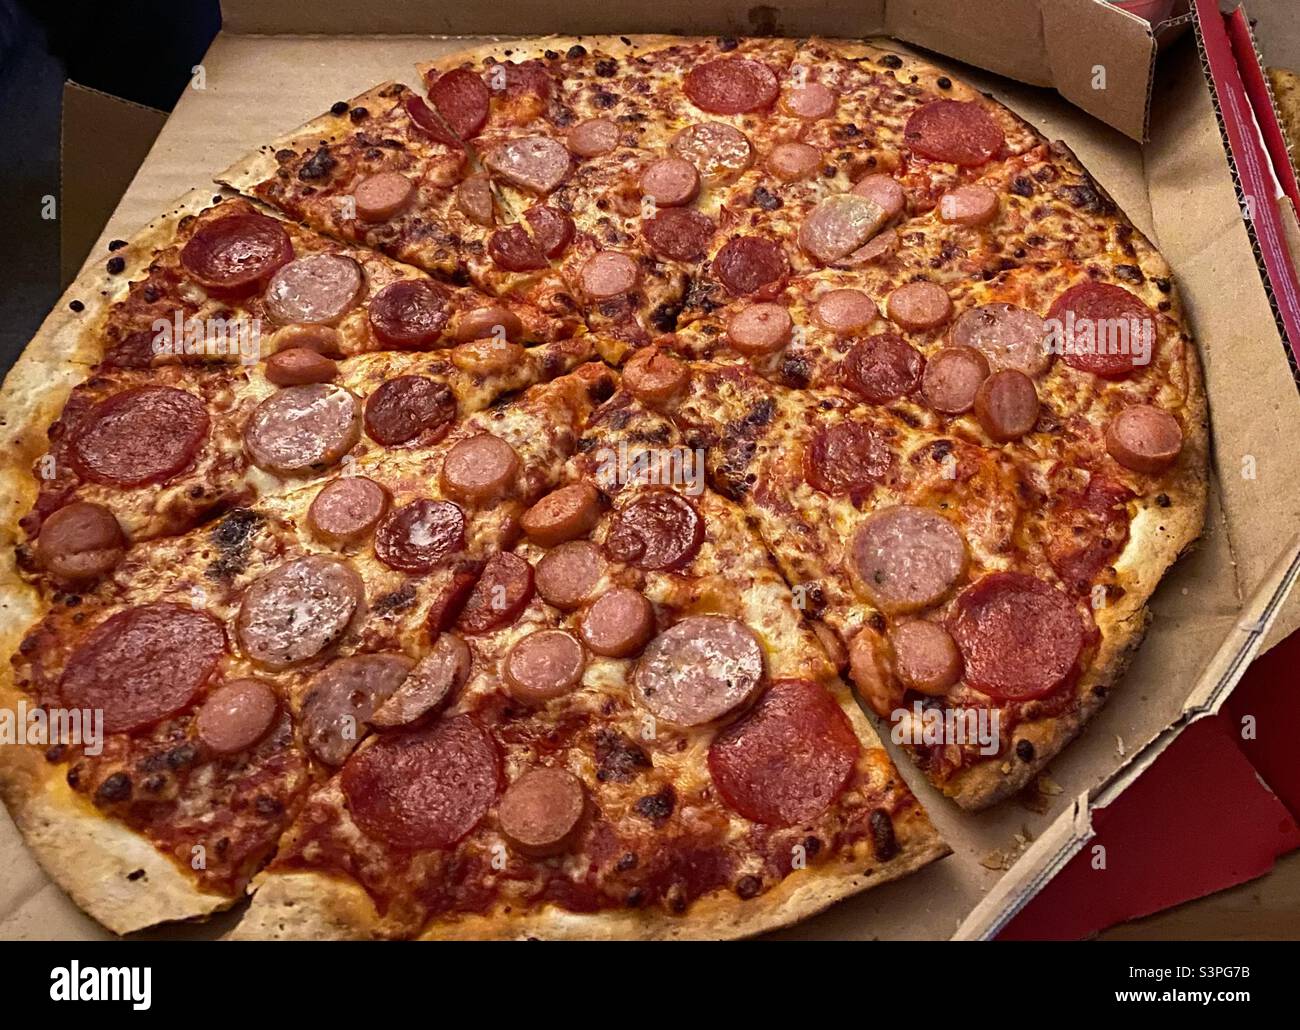 Close up of a meaty pizza in a takeaway box, cooked and ready to eat Stock Photo